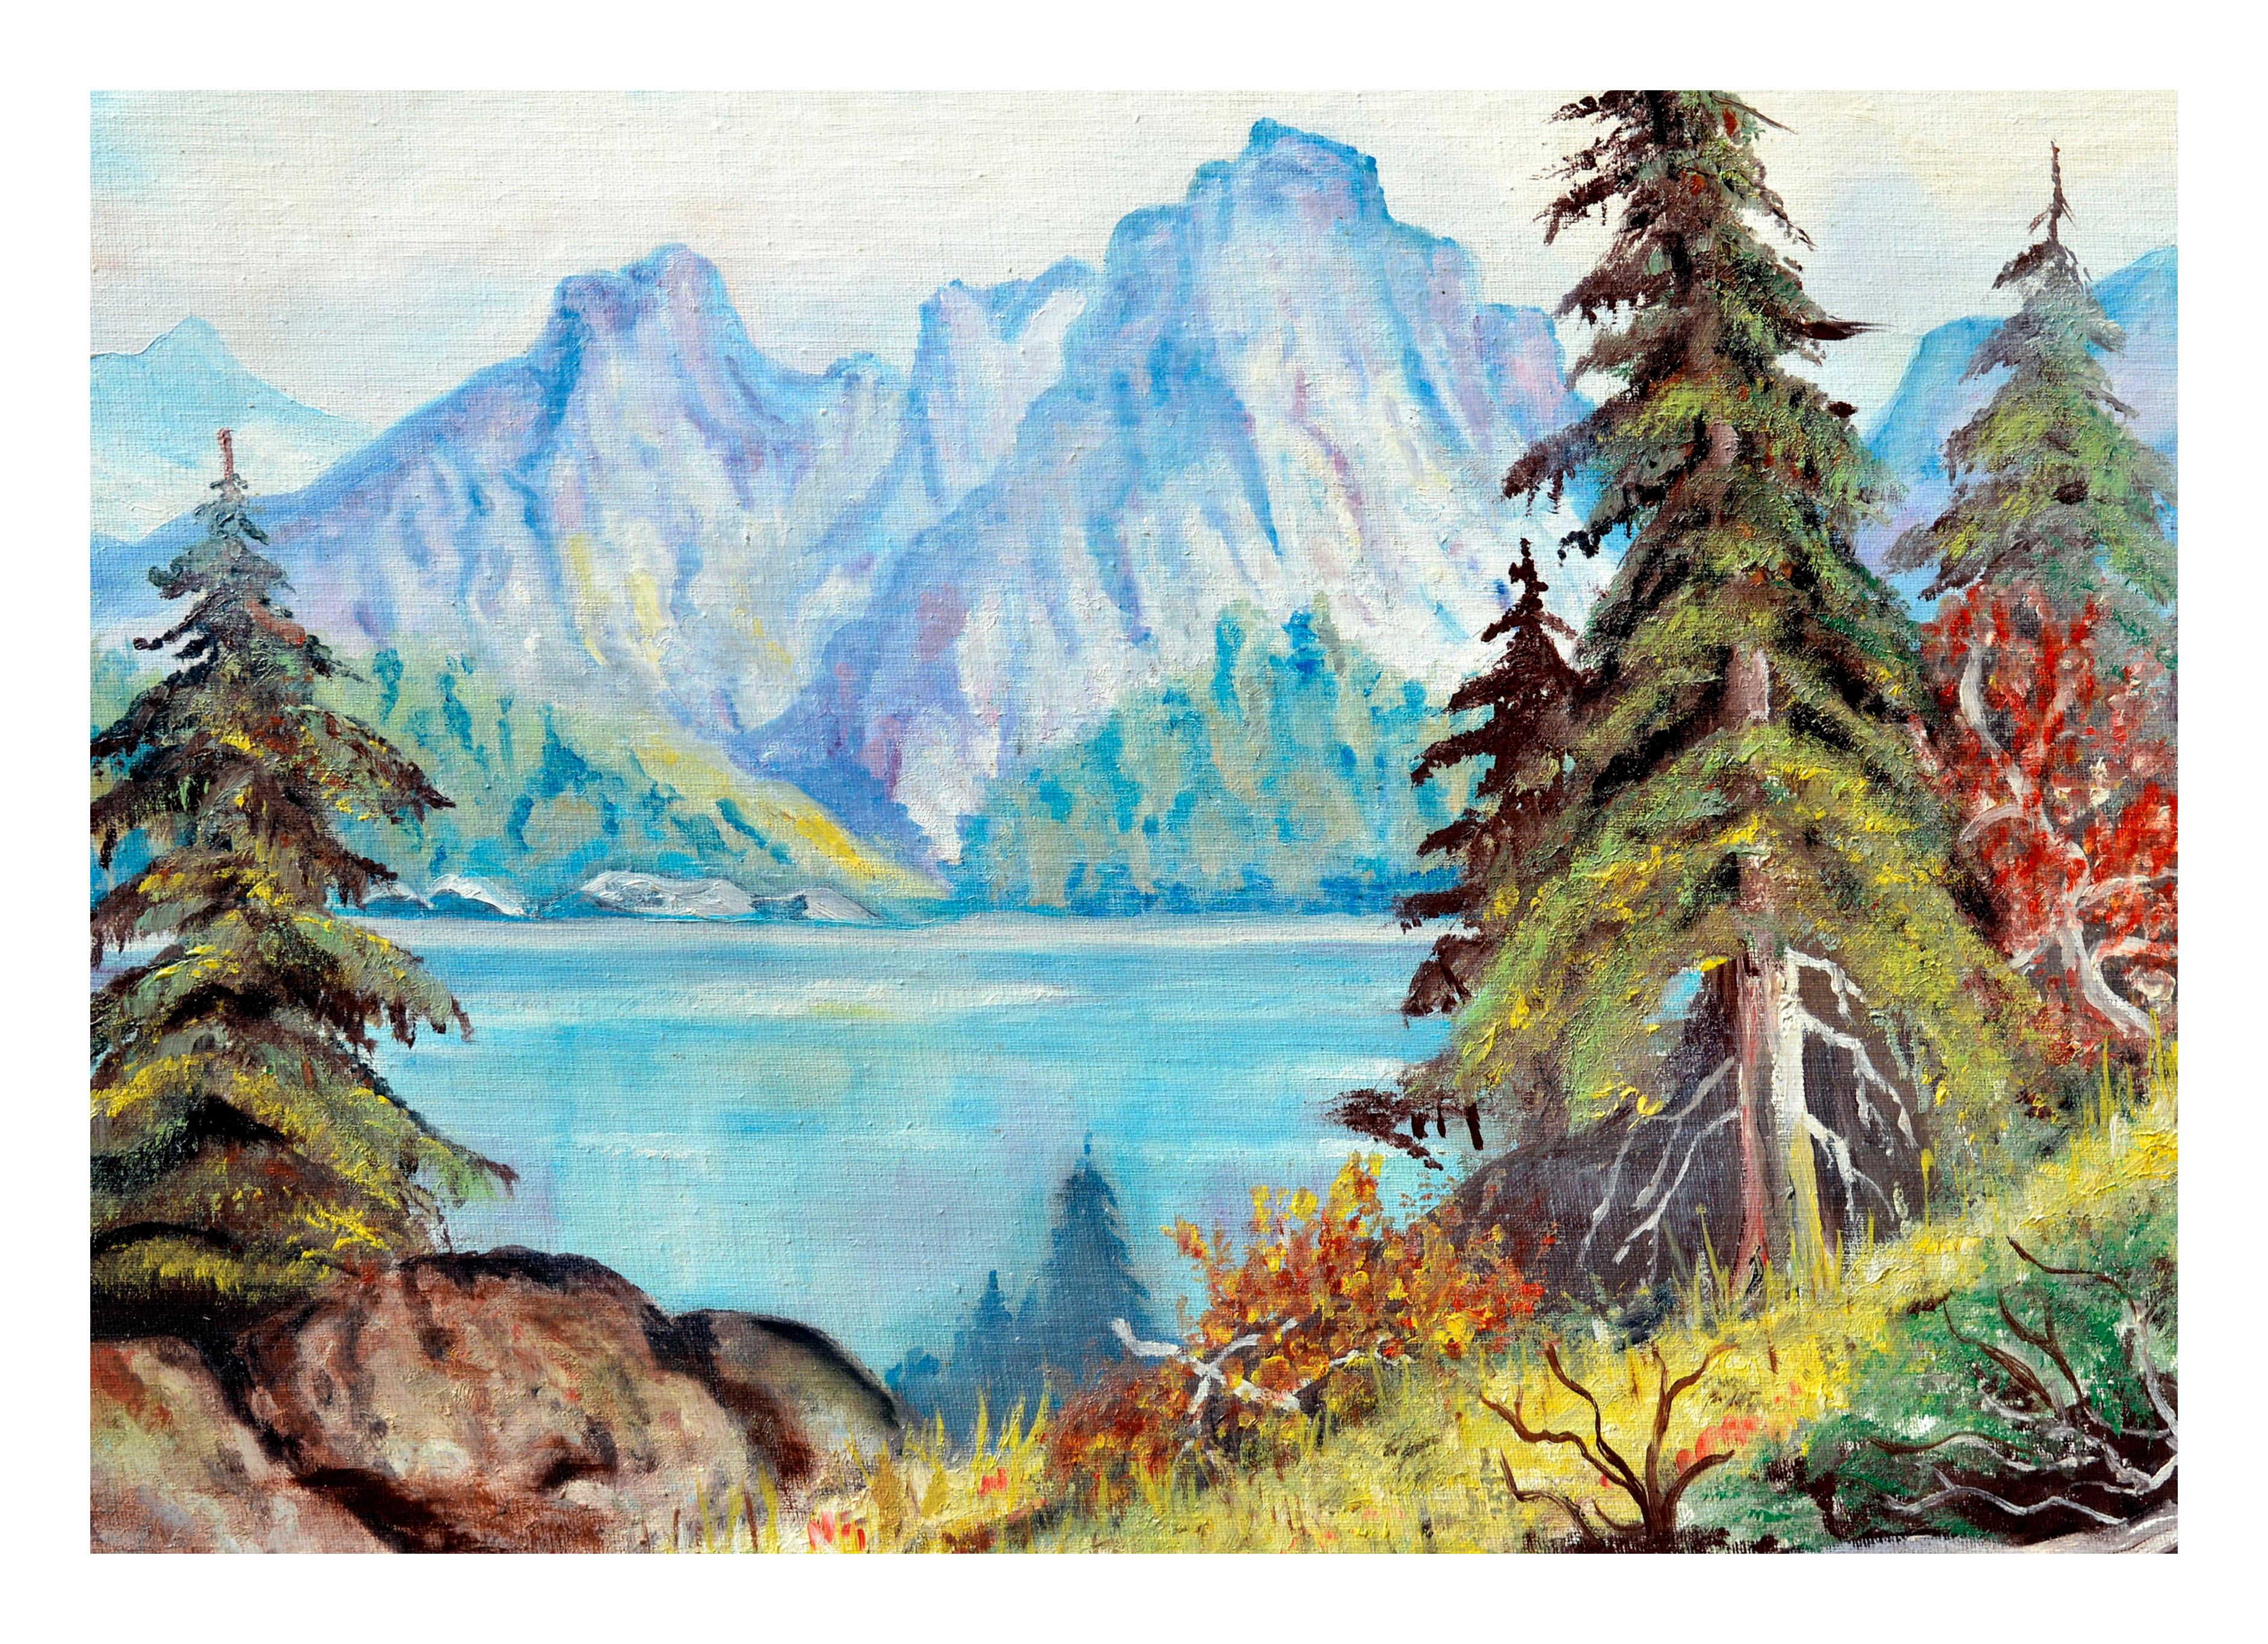 Sierra Mountains Reflecting on Tahoe Lake  - Painting by J. Conover